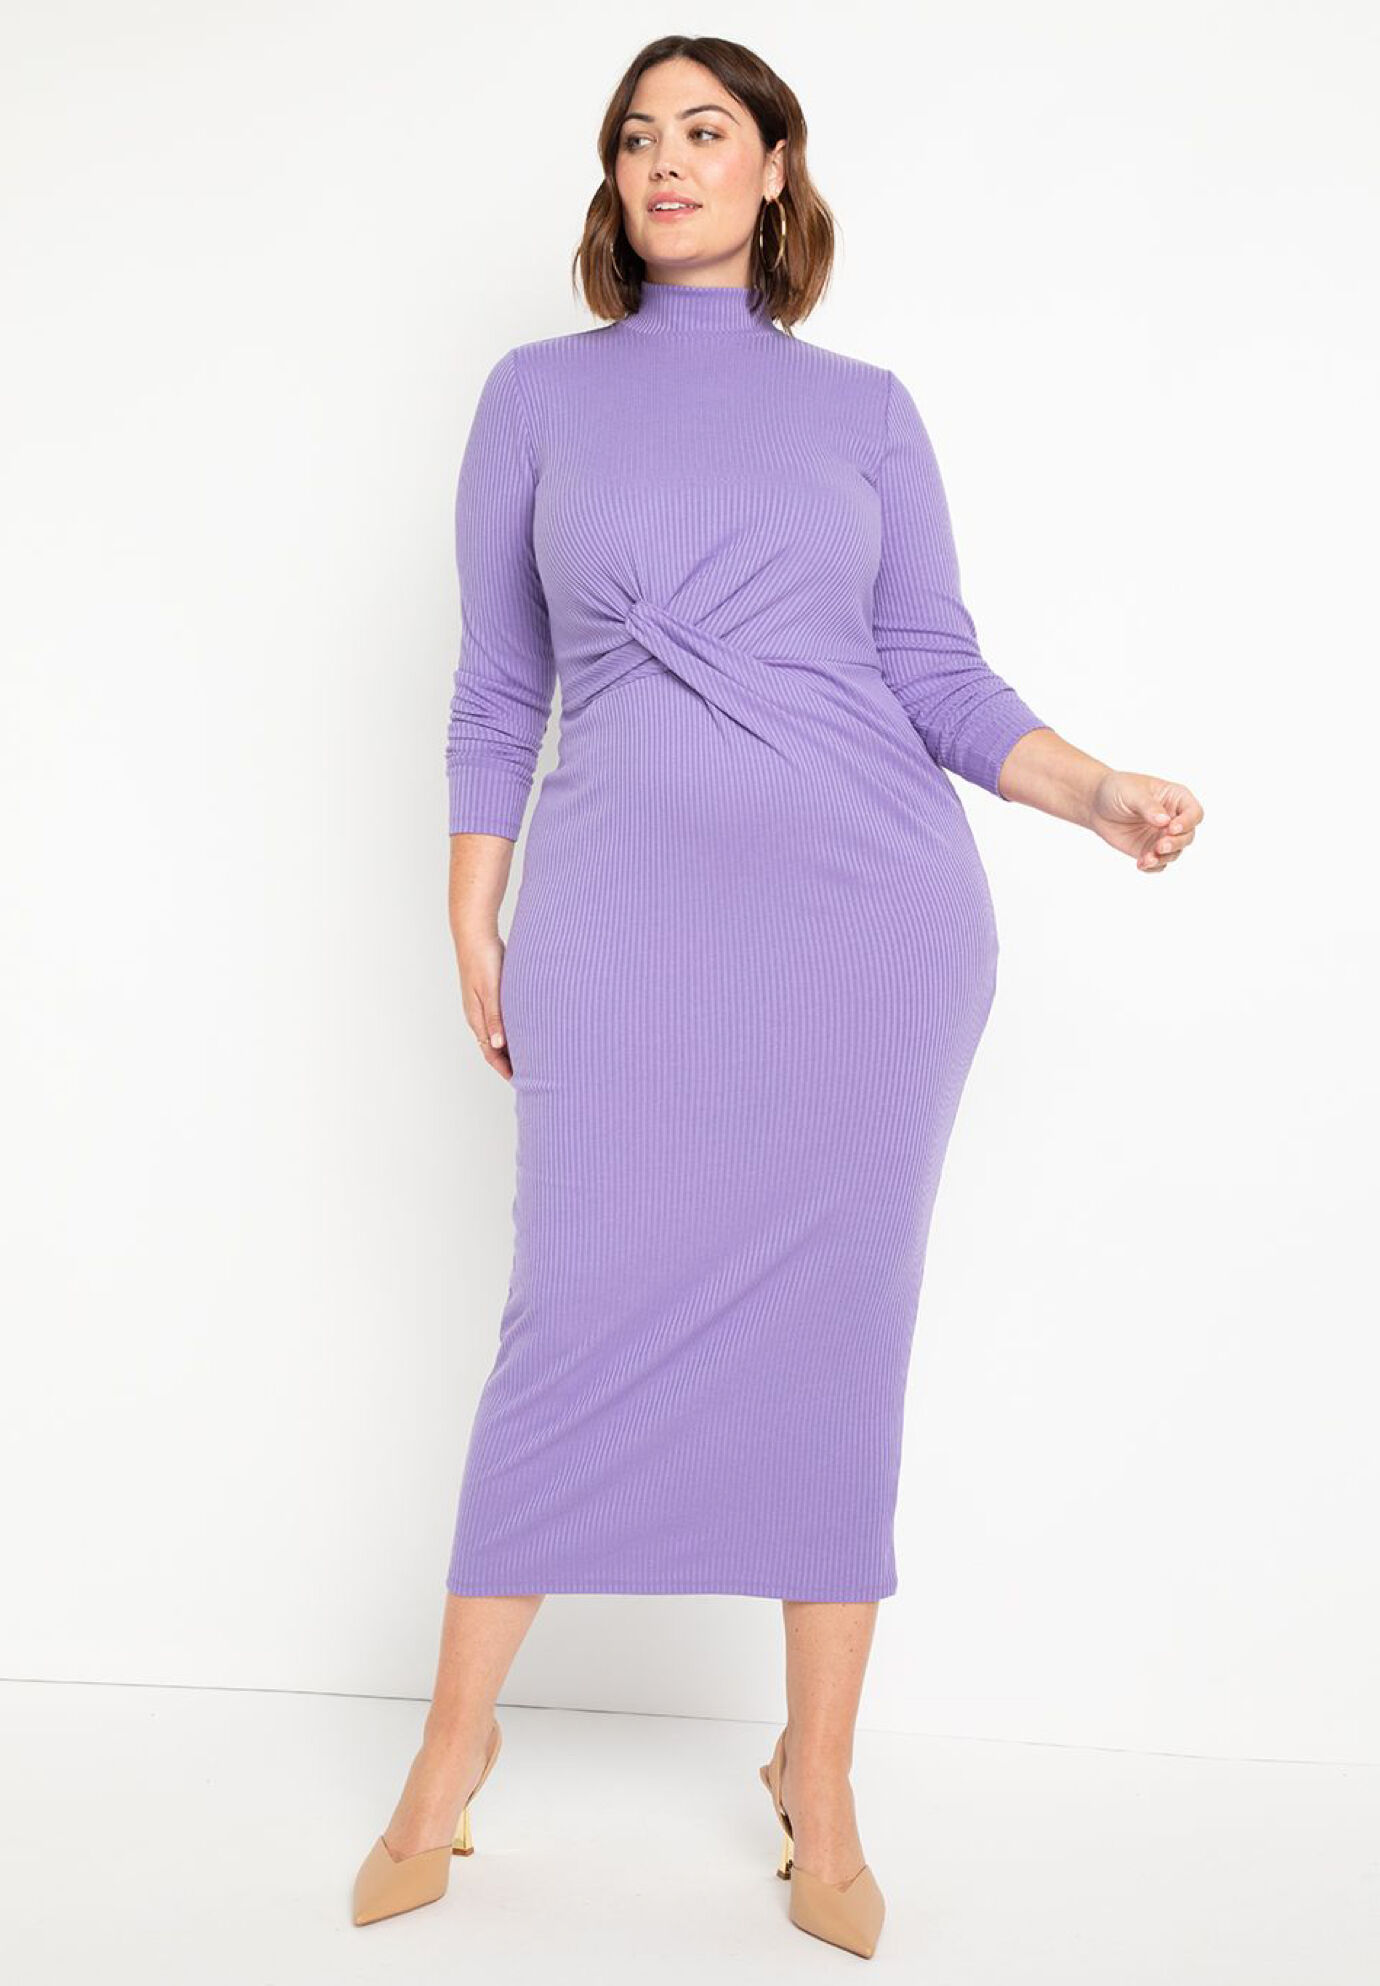 Fitted Ribbed Dress by Eloquii